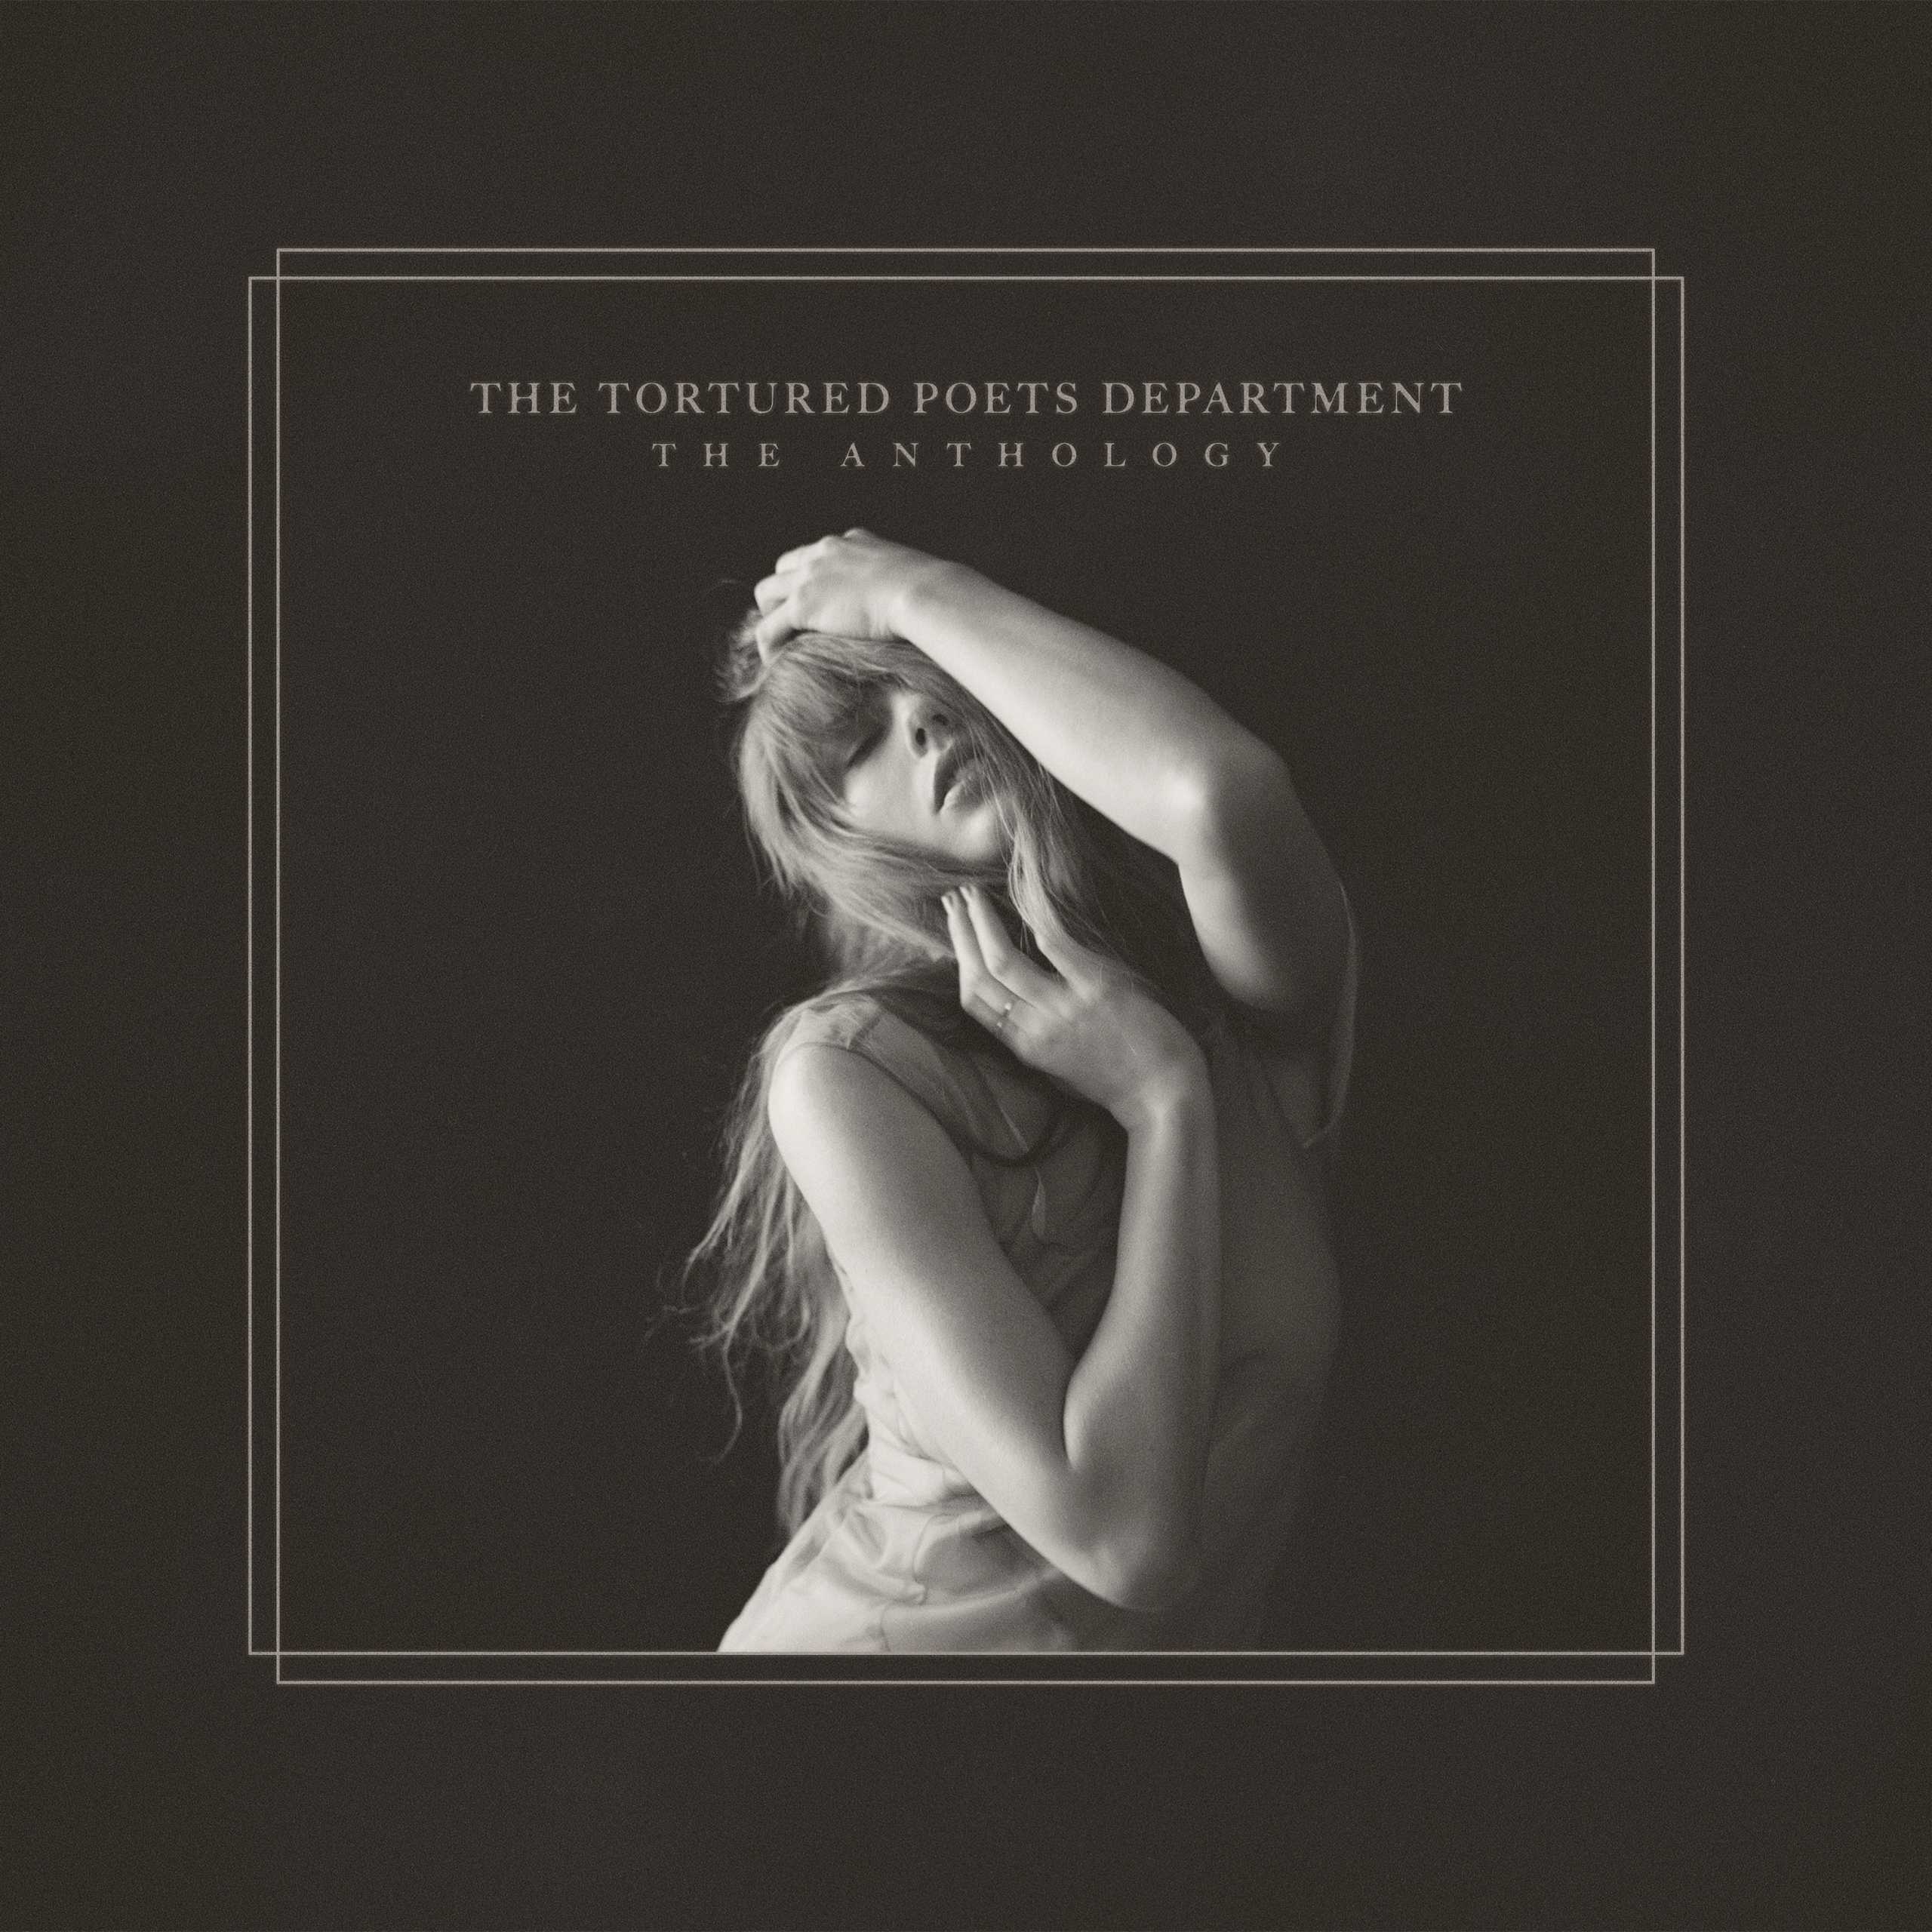 【24bit 48kHZ ALAC】Taylor Swift - THE TORTURED POETS DEPARTMENT：THE ANTHOLOGY